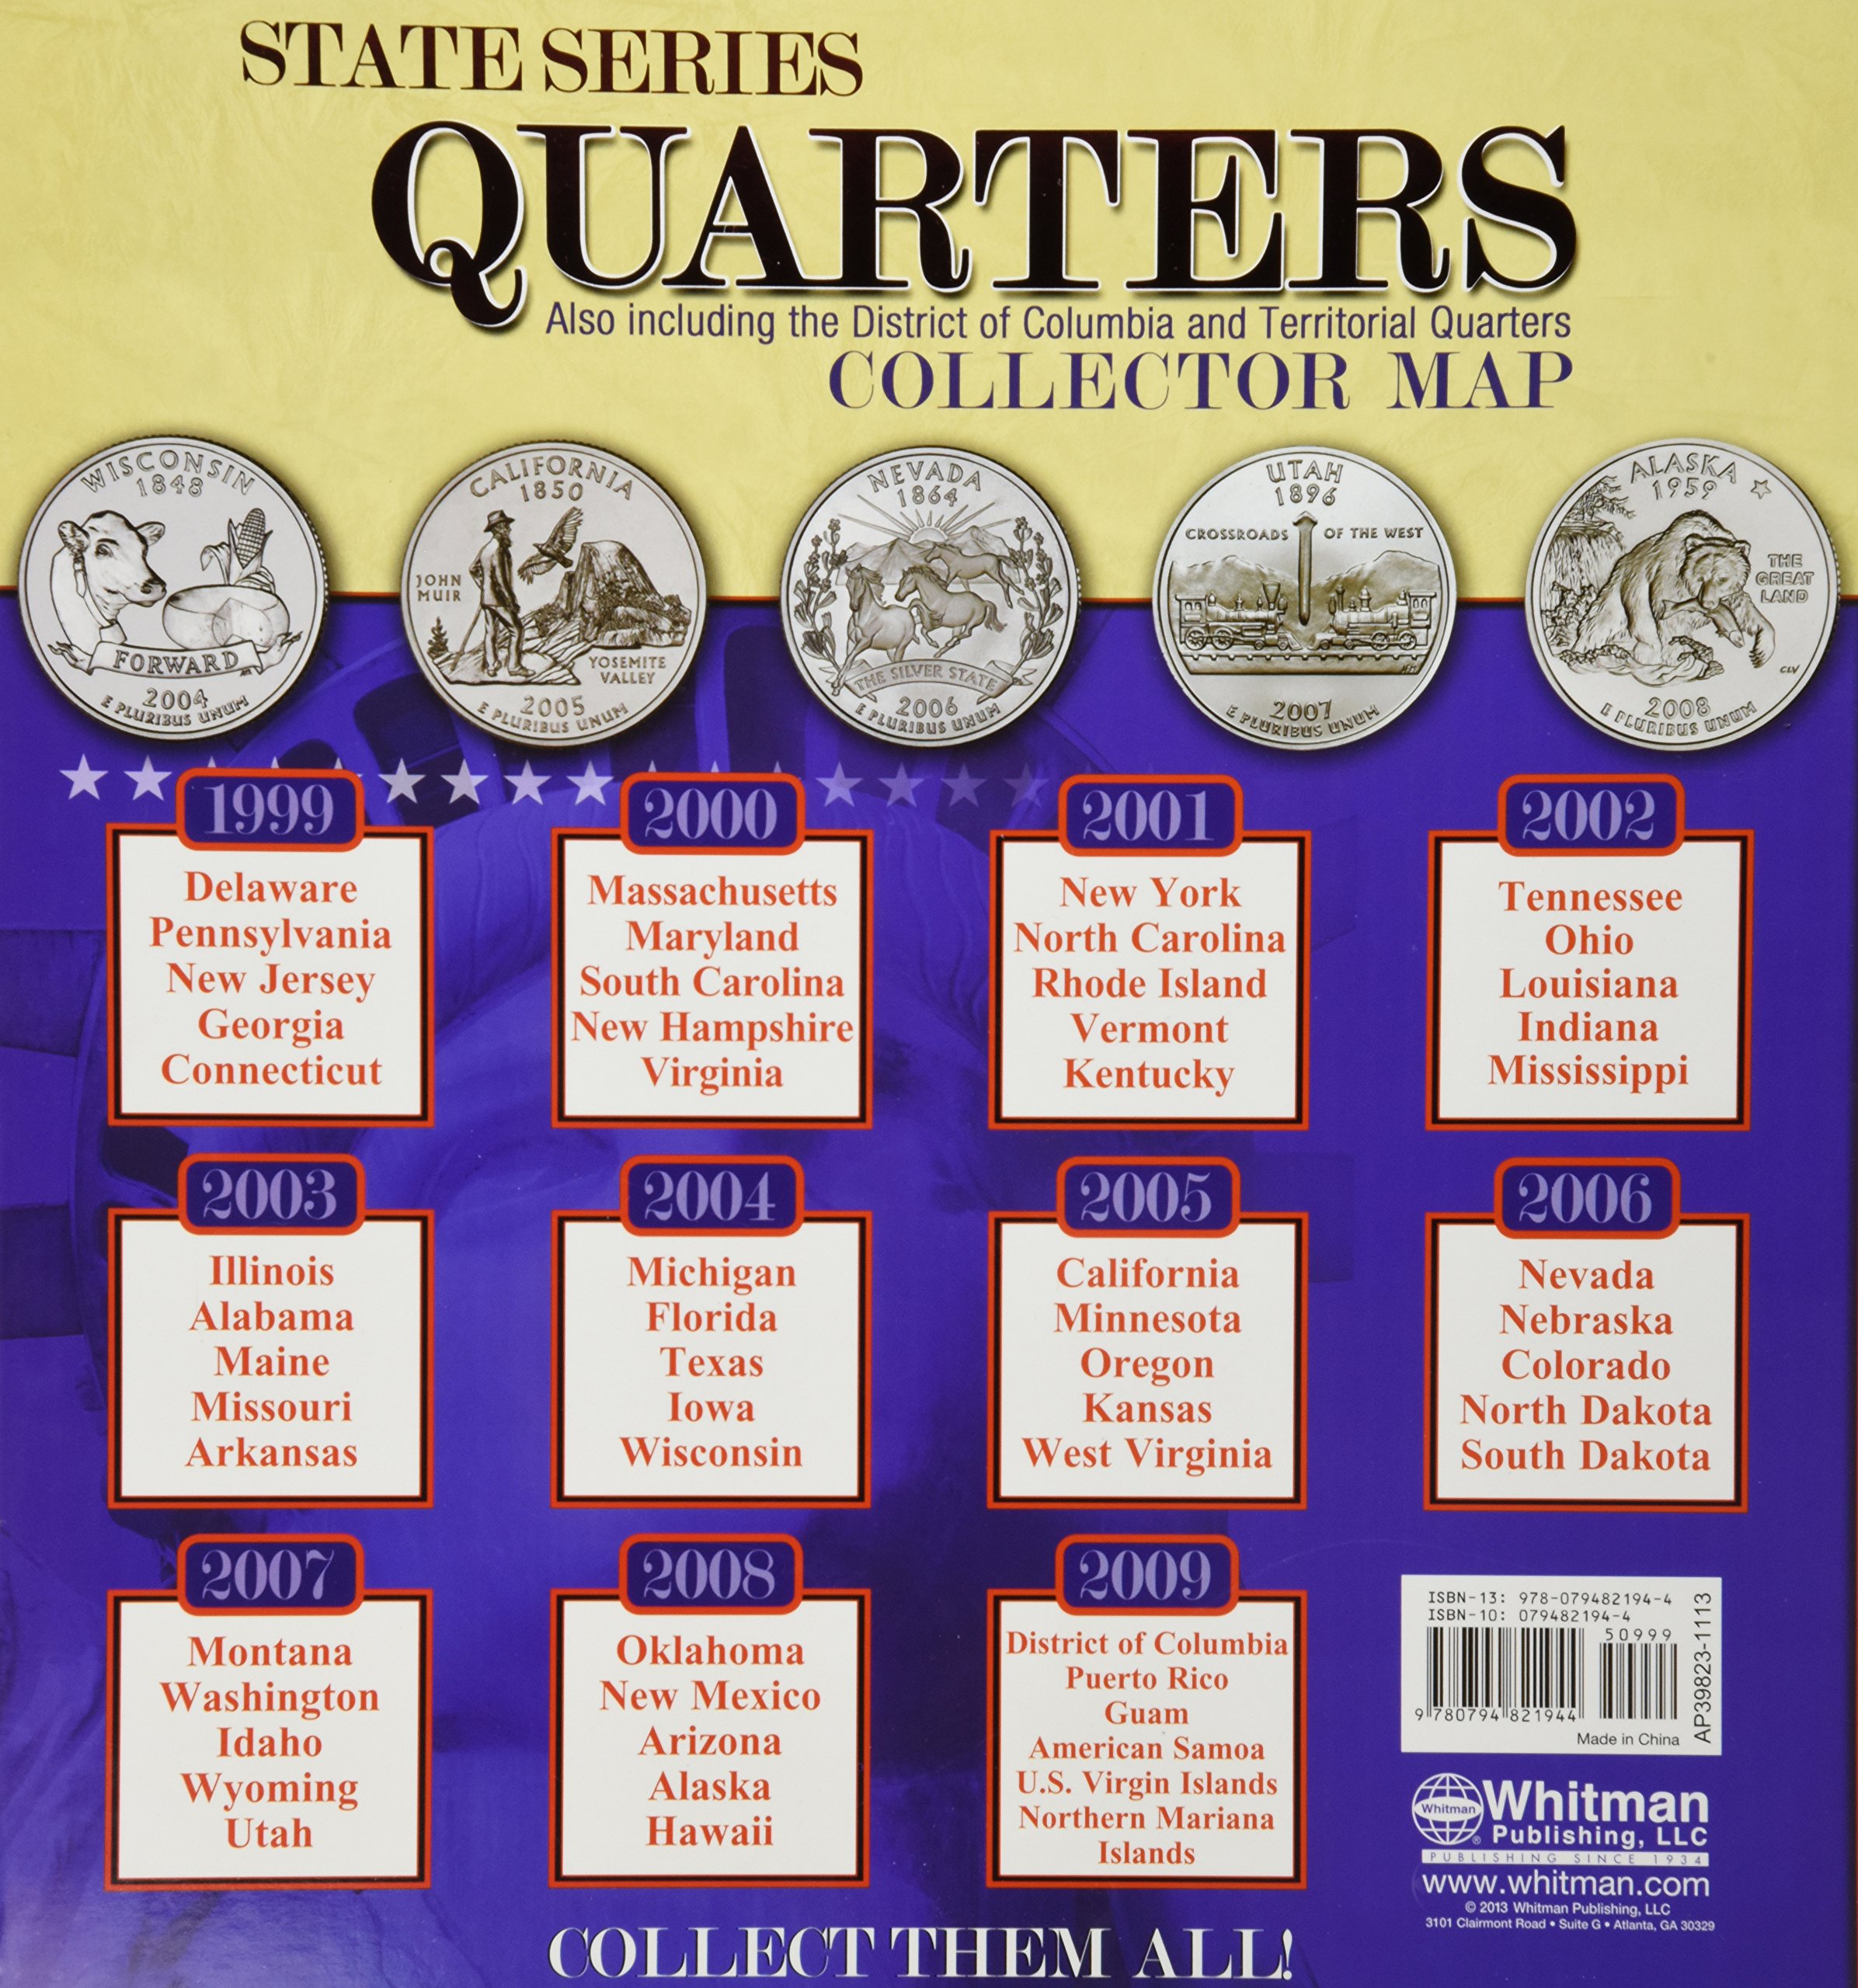 State Series Quarters Collector Map: Also Including the District of Columbia and Territorial Quarters